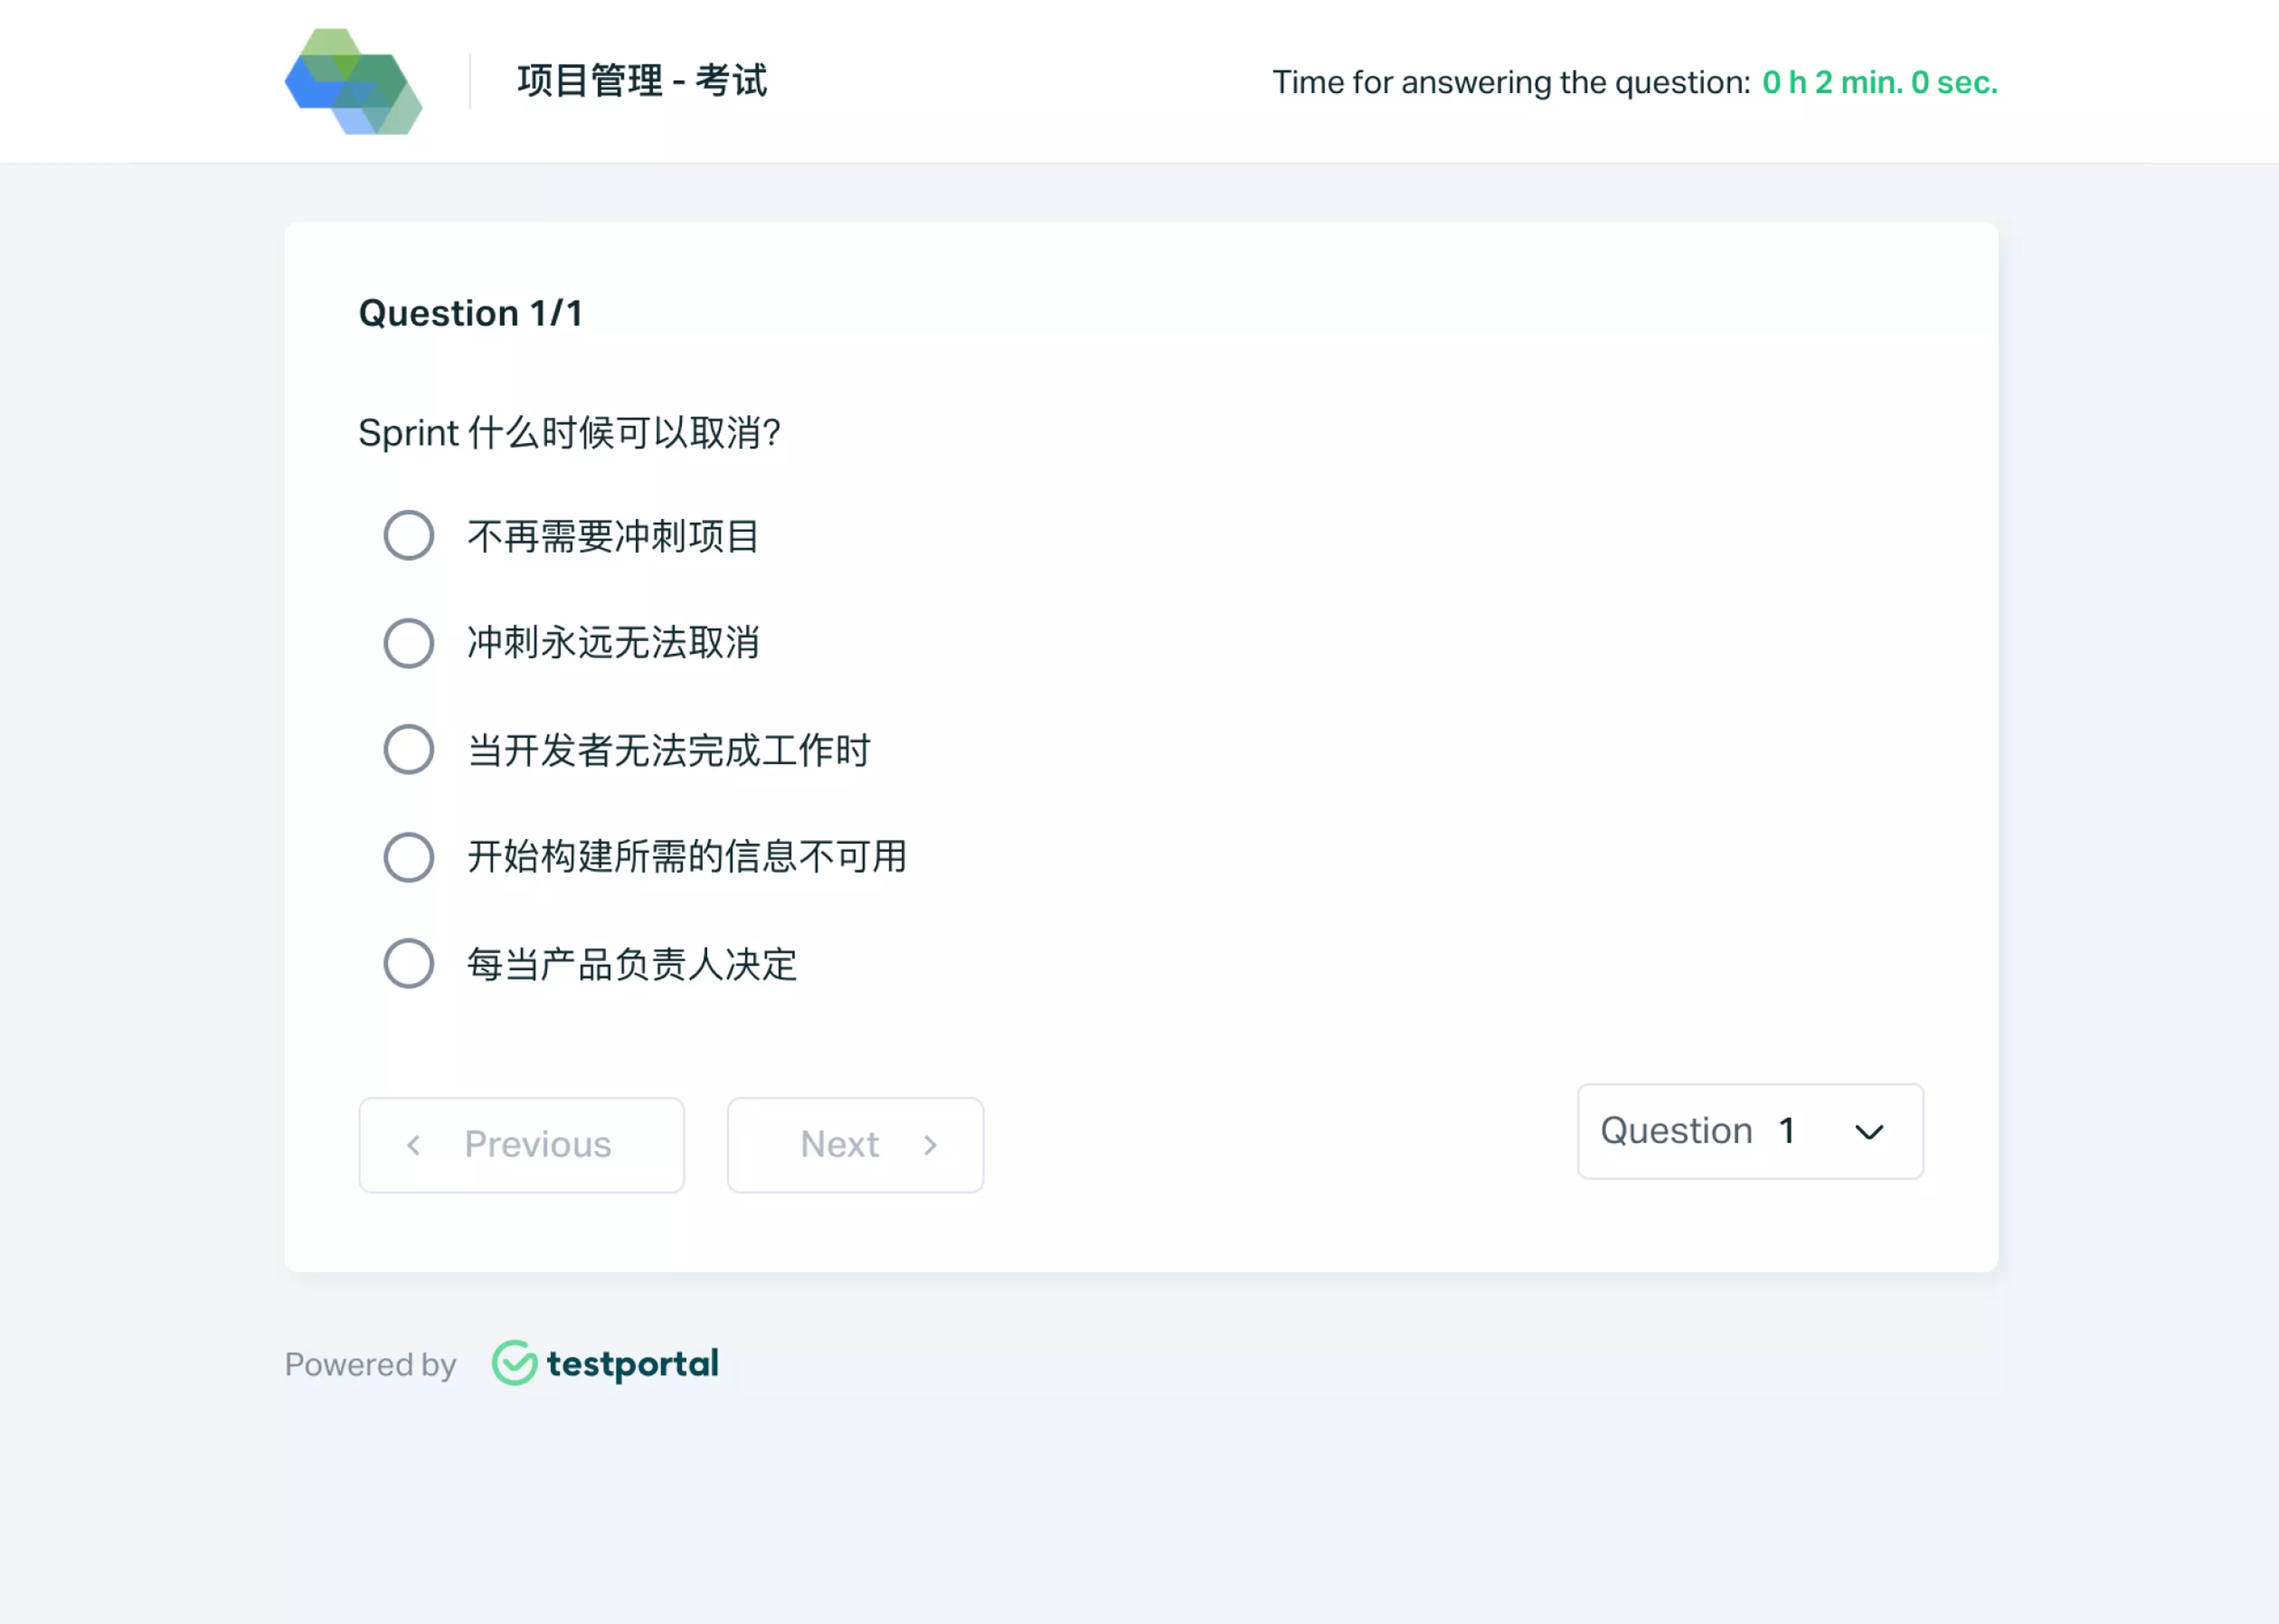 Testportal online test question with a stem and possible answers in Chinese.